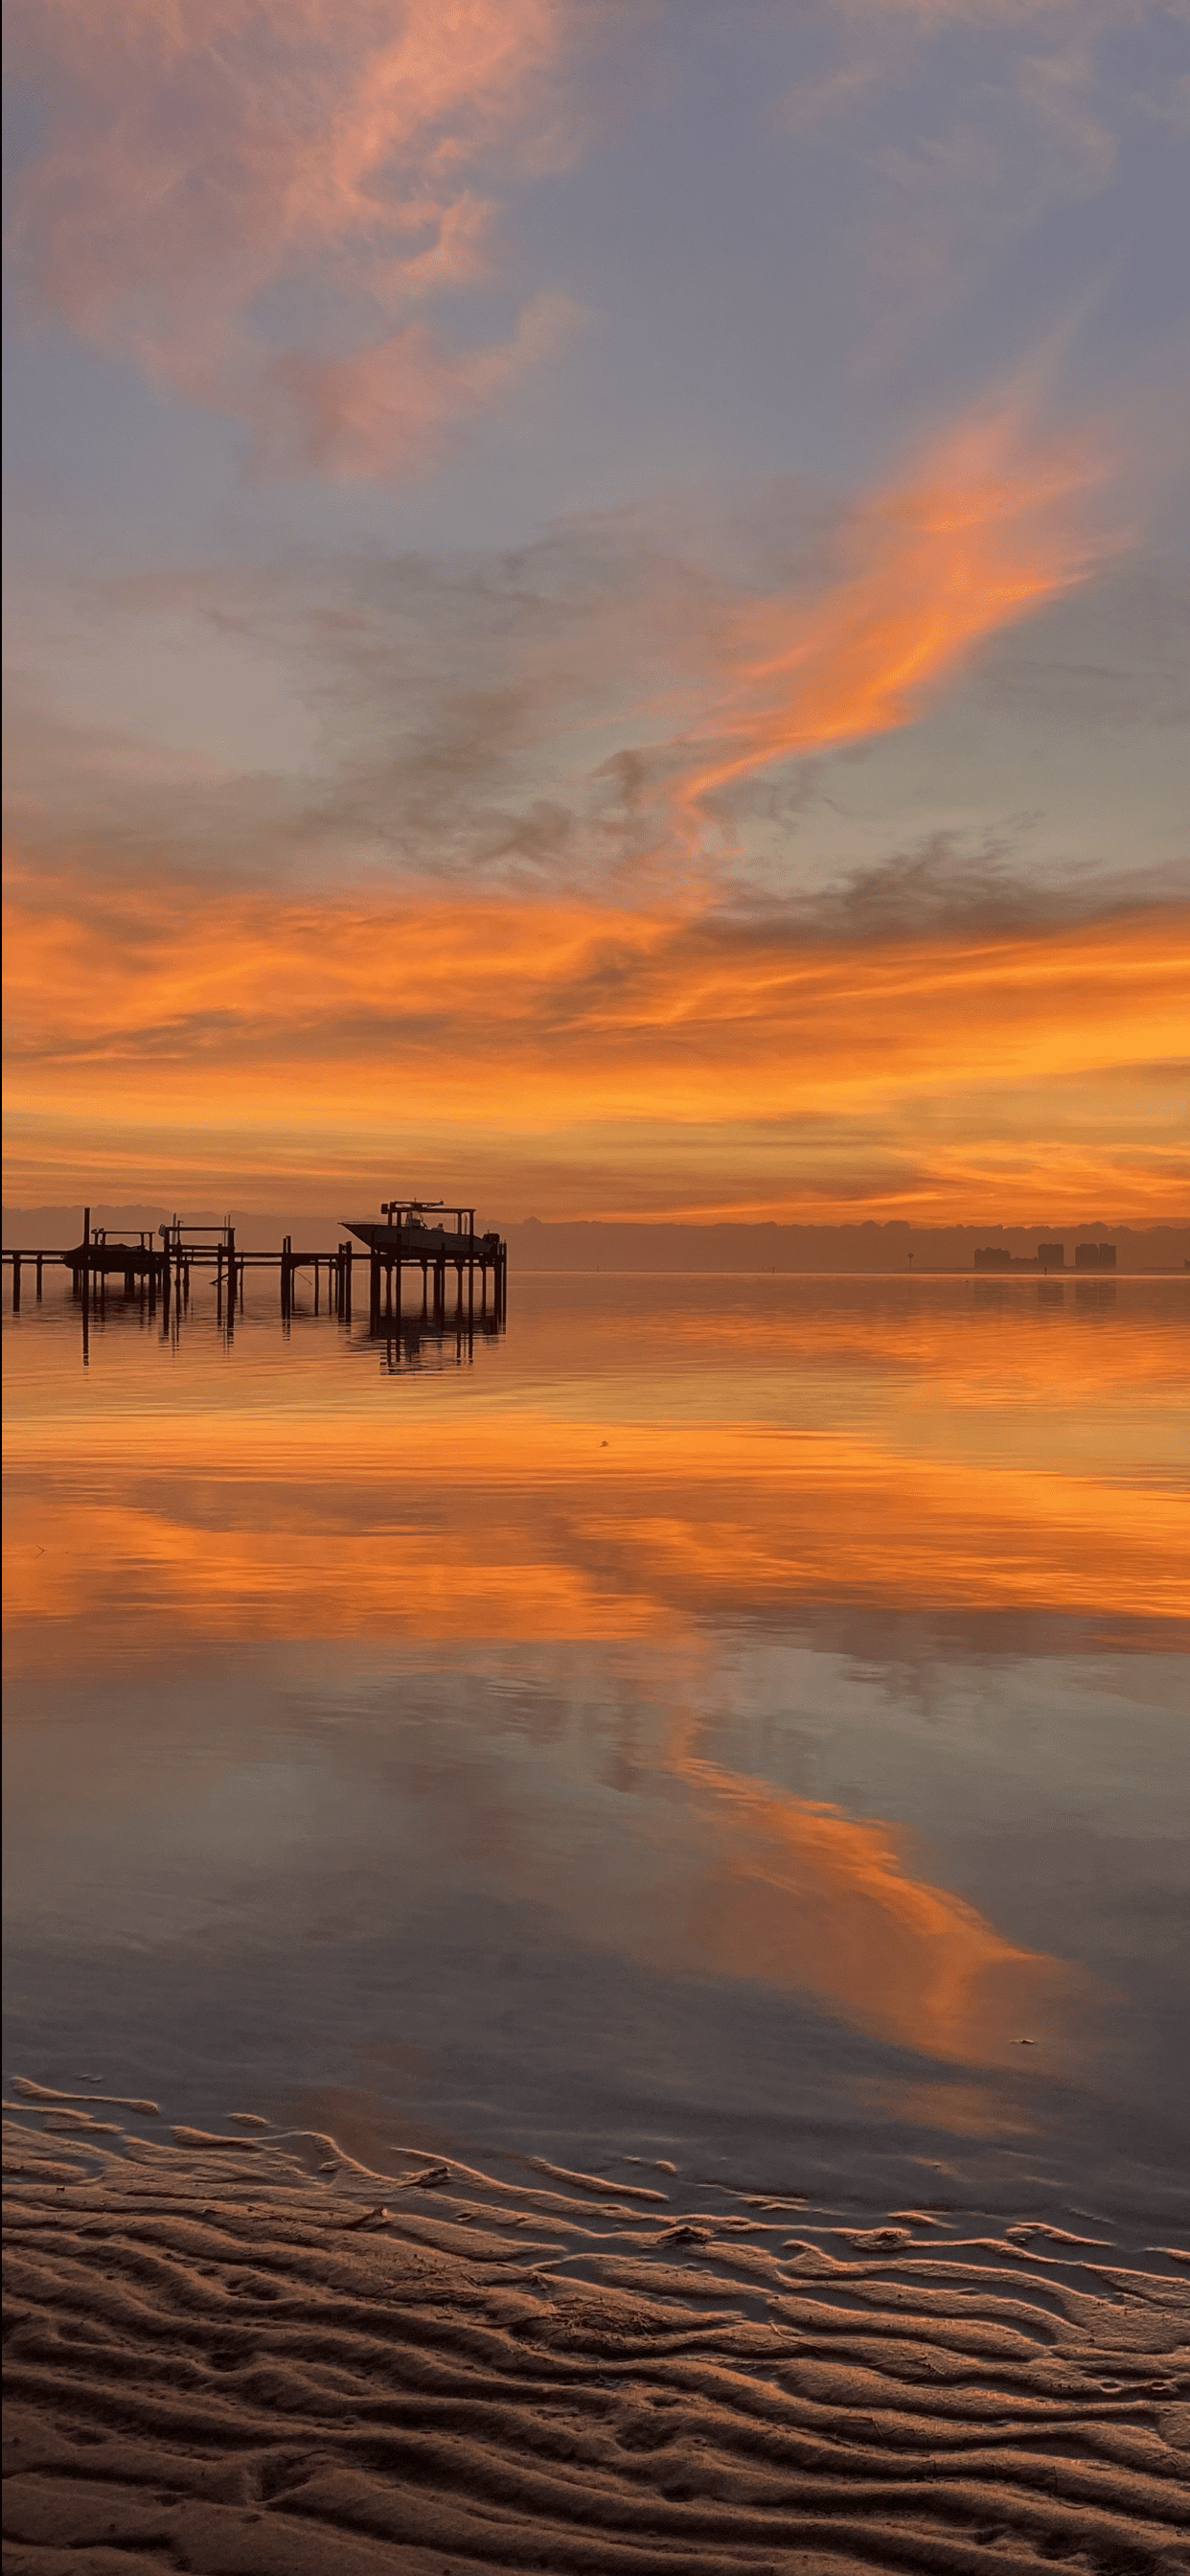 Today's Photo of the Day comes from Frank Lundie. Frank took this awesome photo of a sound-side sunrise in Navarre. 🌅